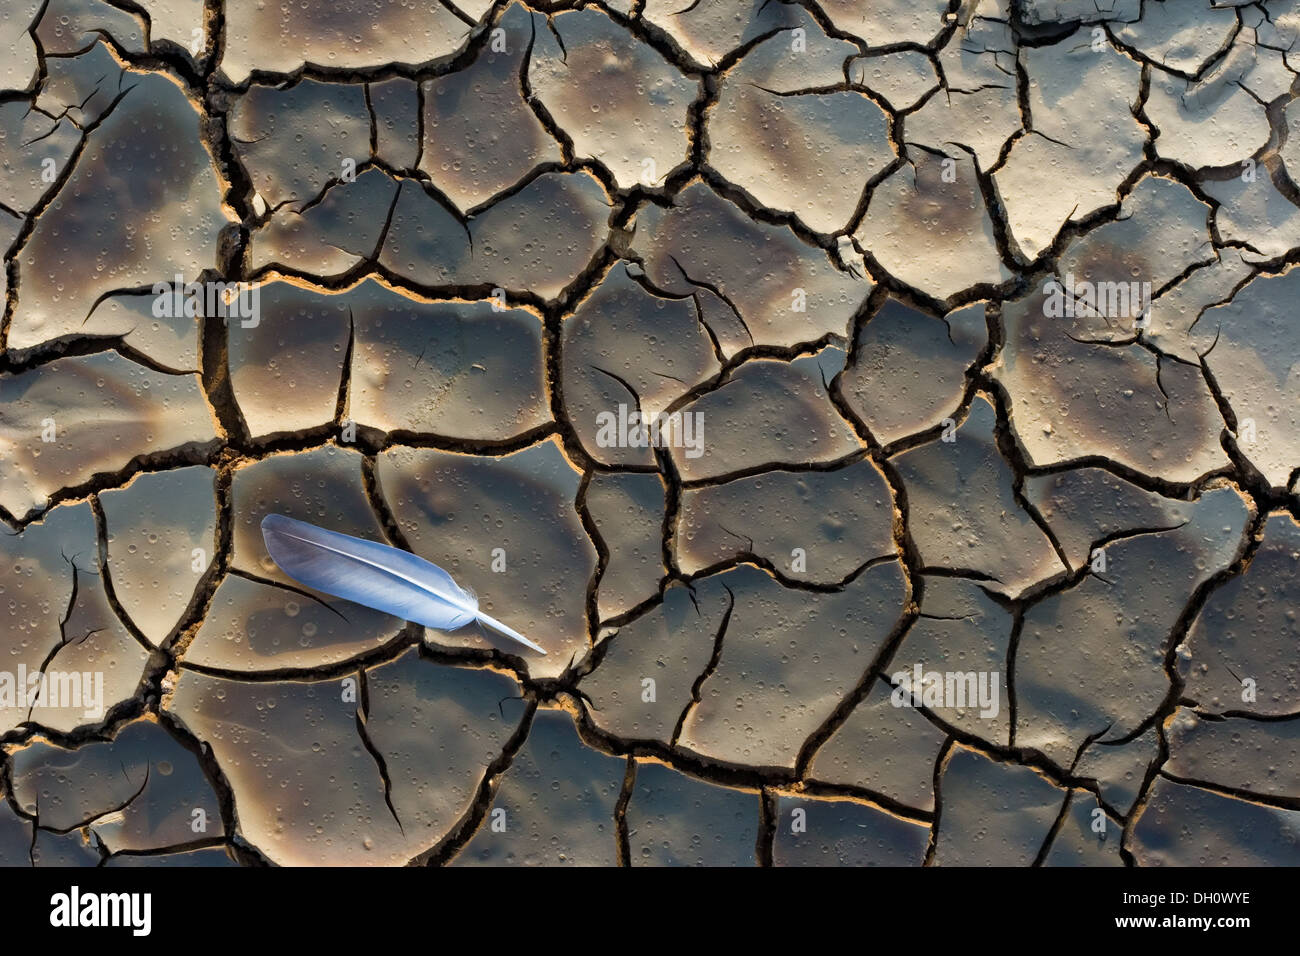 White feather on the dry, cracked ground Stock Photo